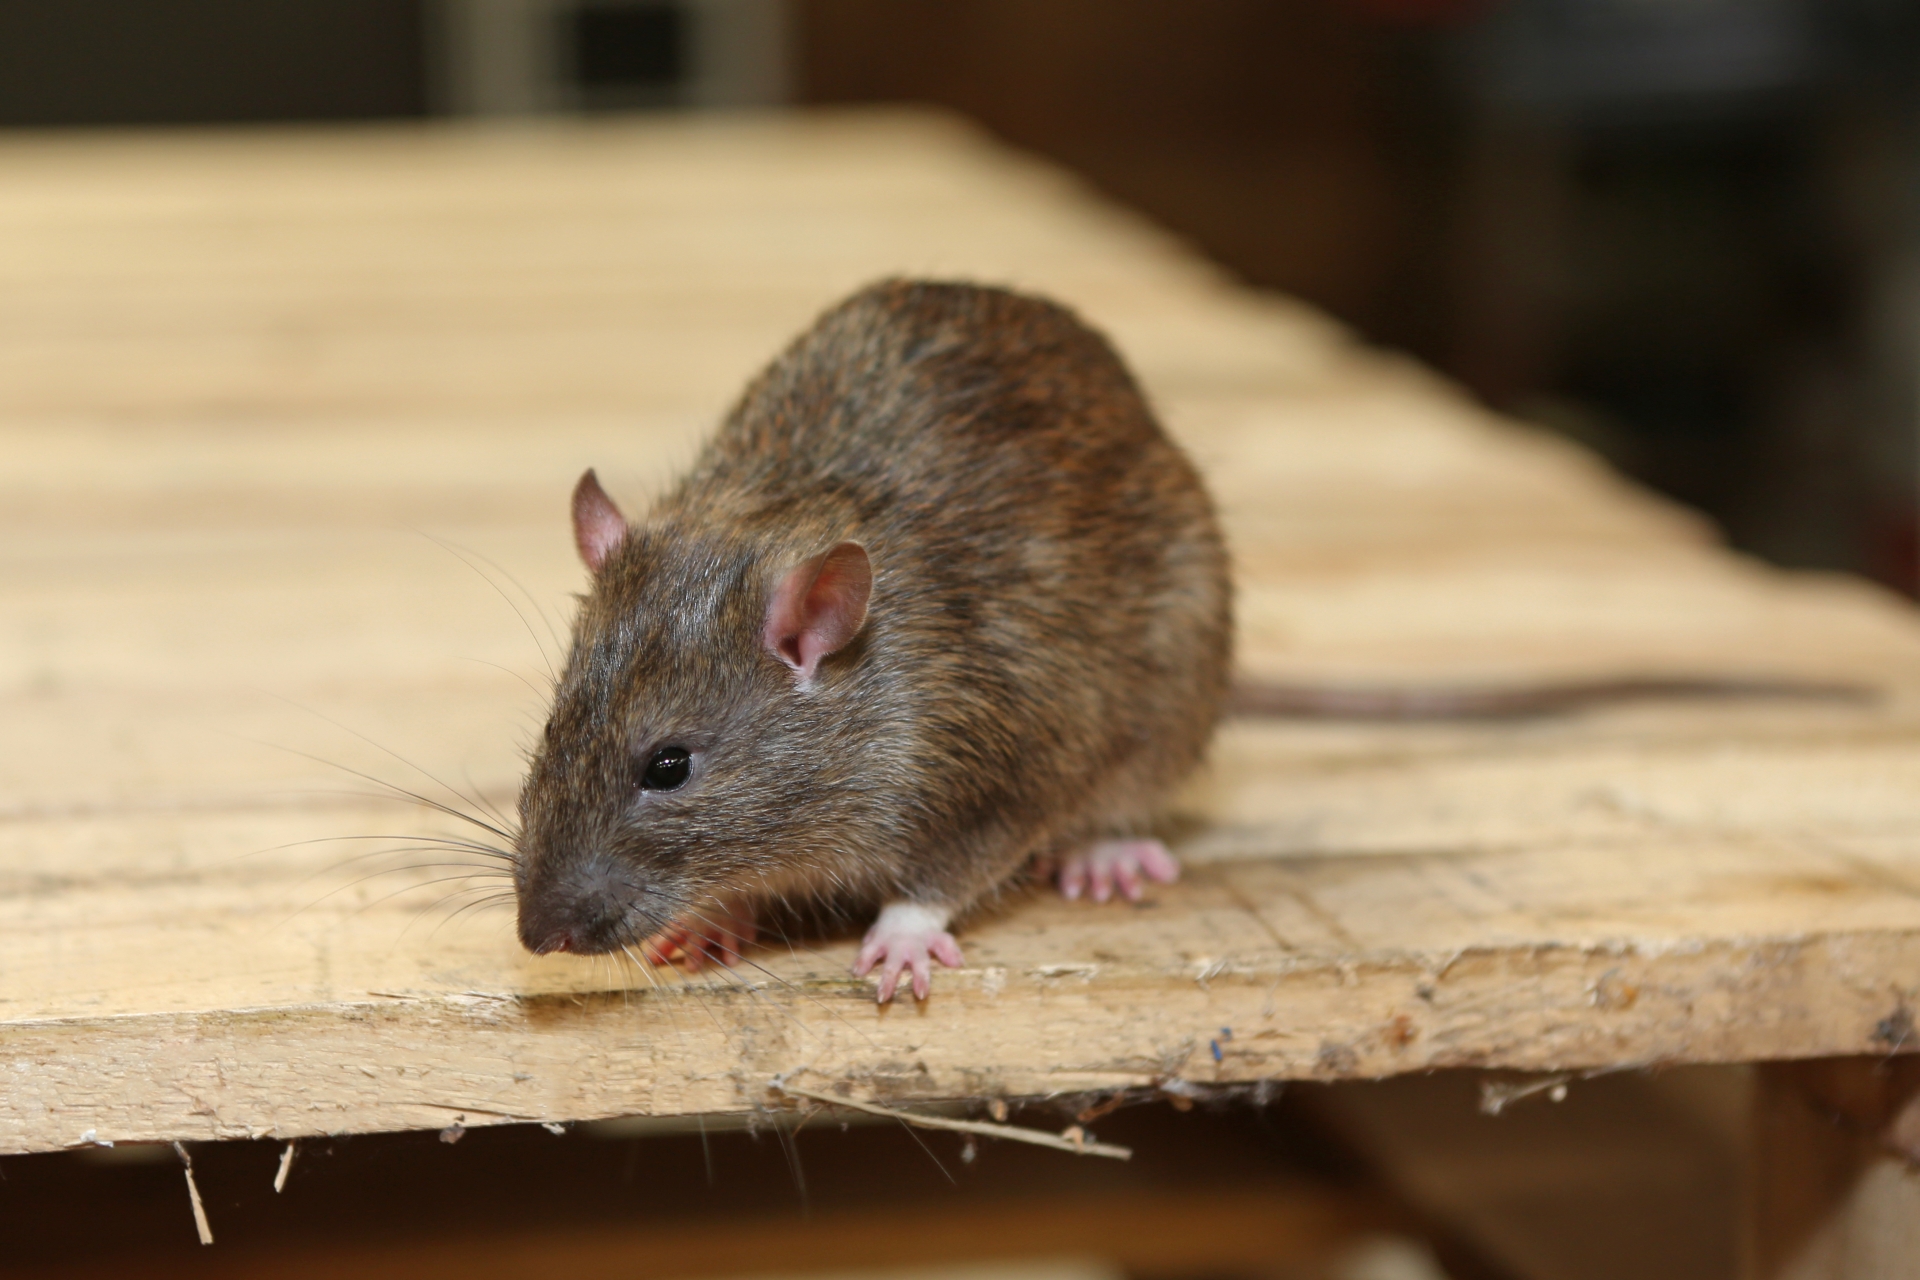 Rat extermination, Pest Control in North Finchley, Woodside Park, N12. Call Now 020 8166 9746